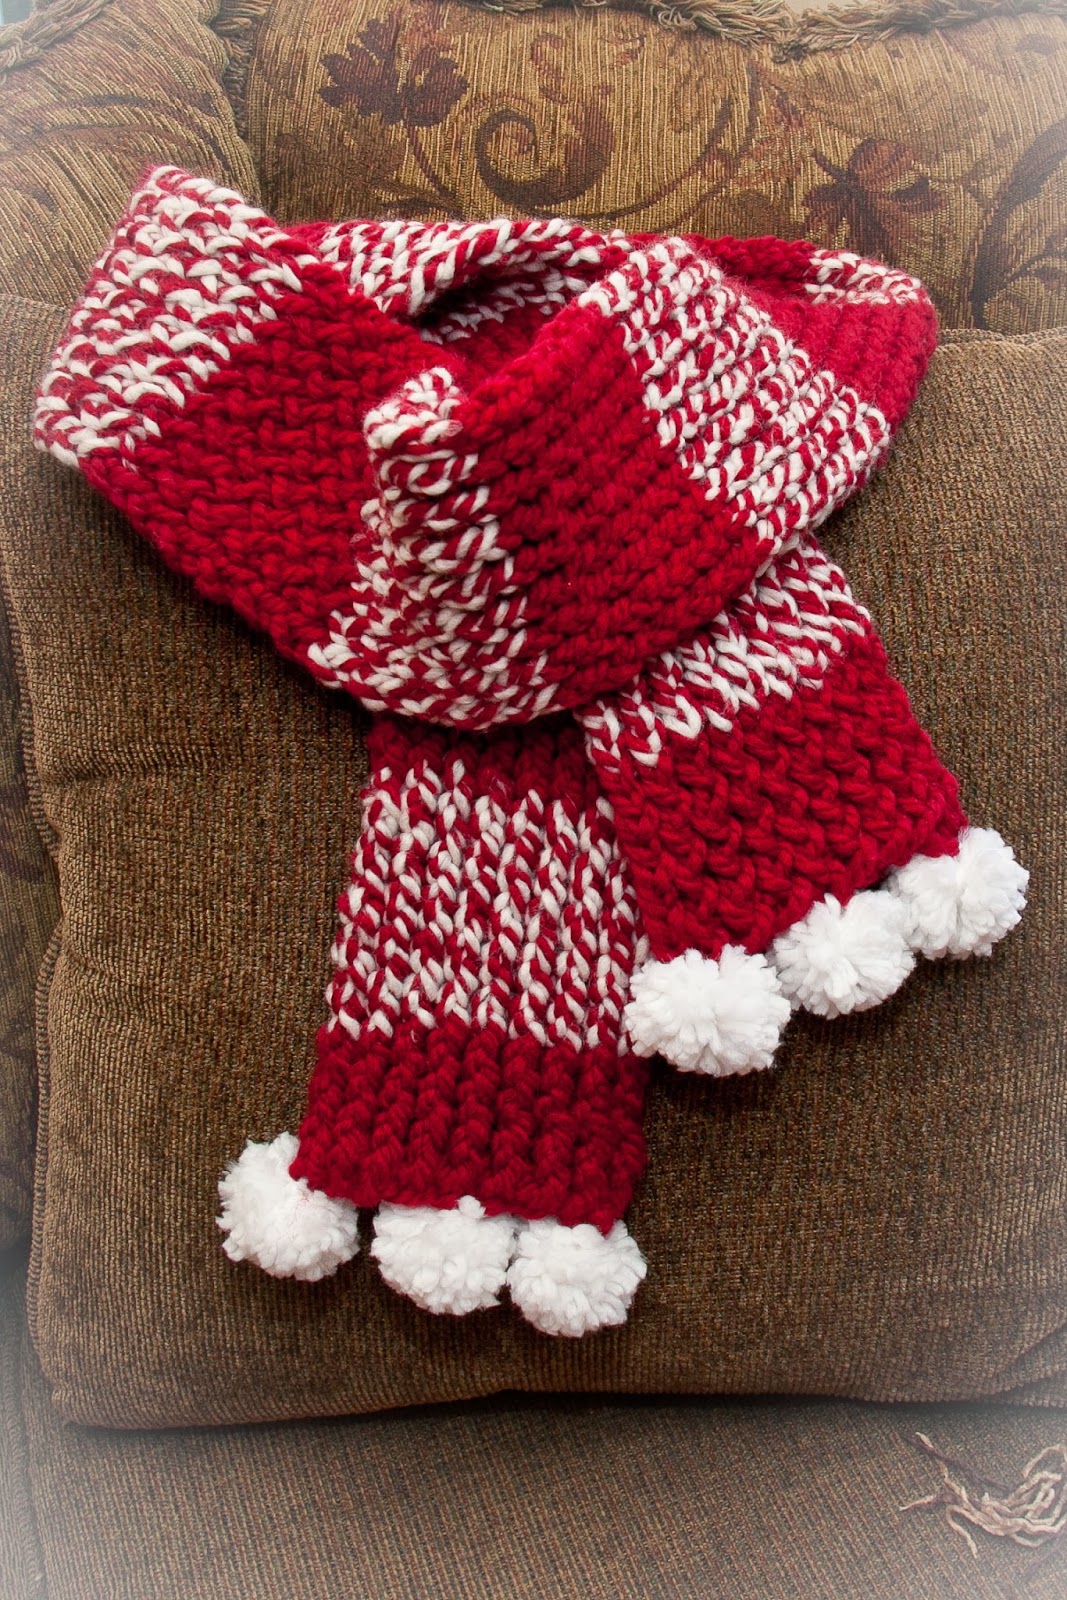 LOOM KNIT HOLIDAY SCARF | Loom Knitting by This Moment is ...